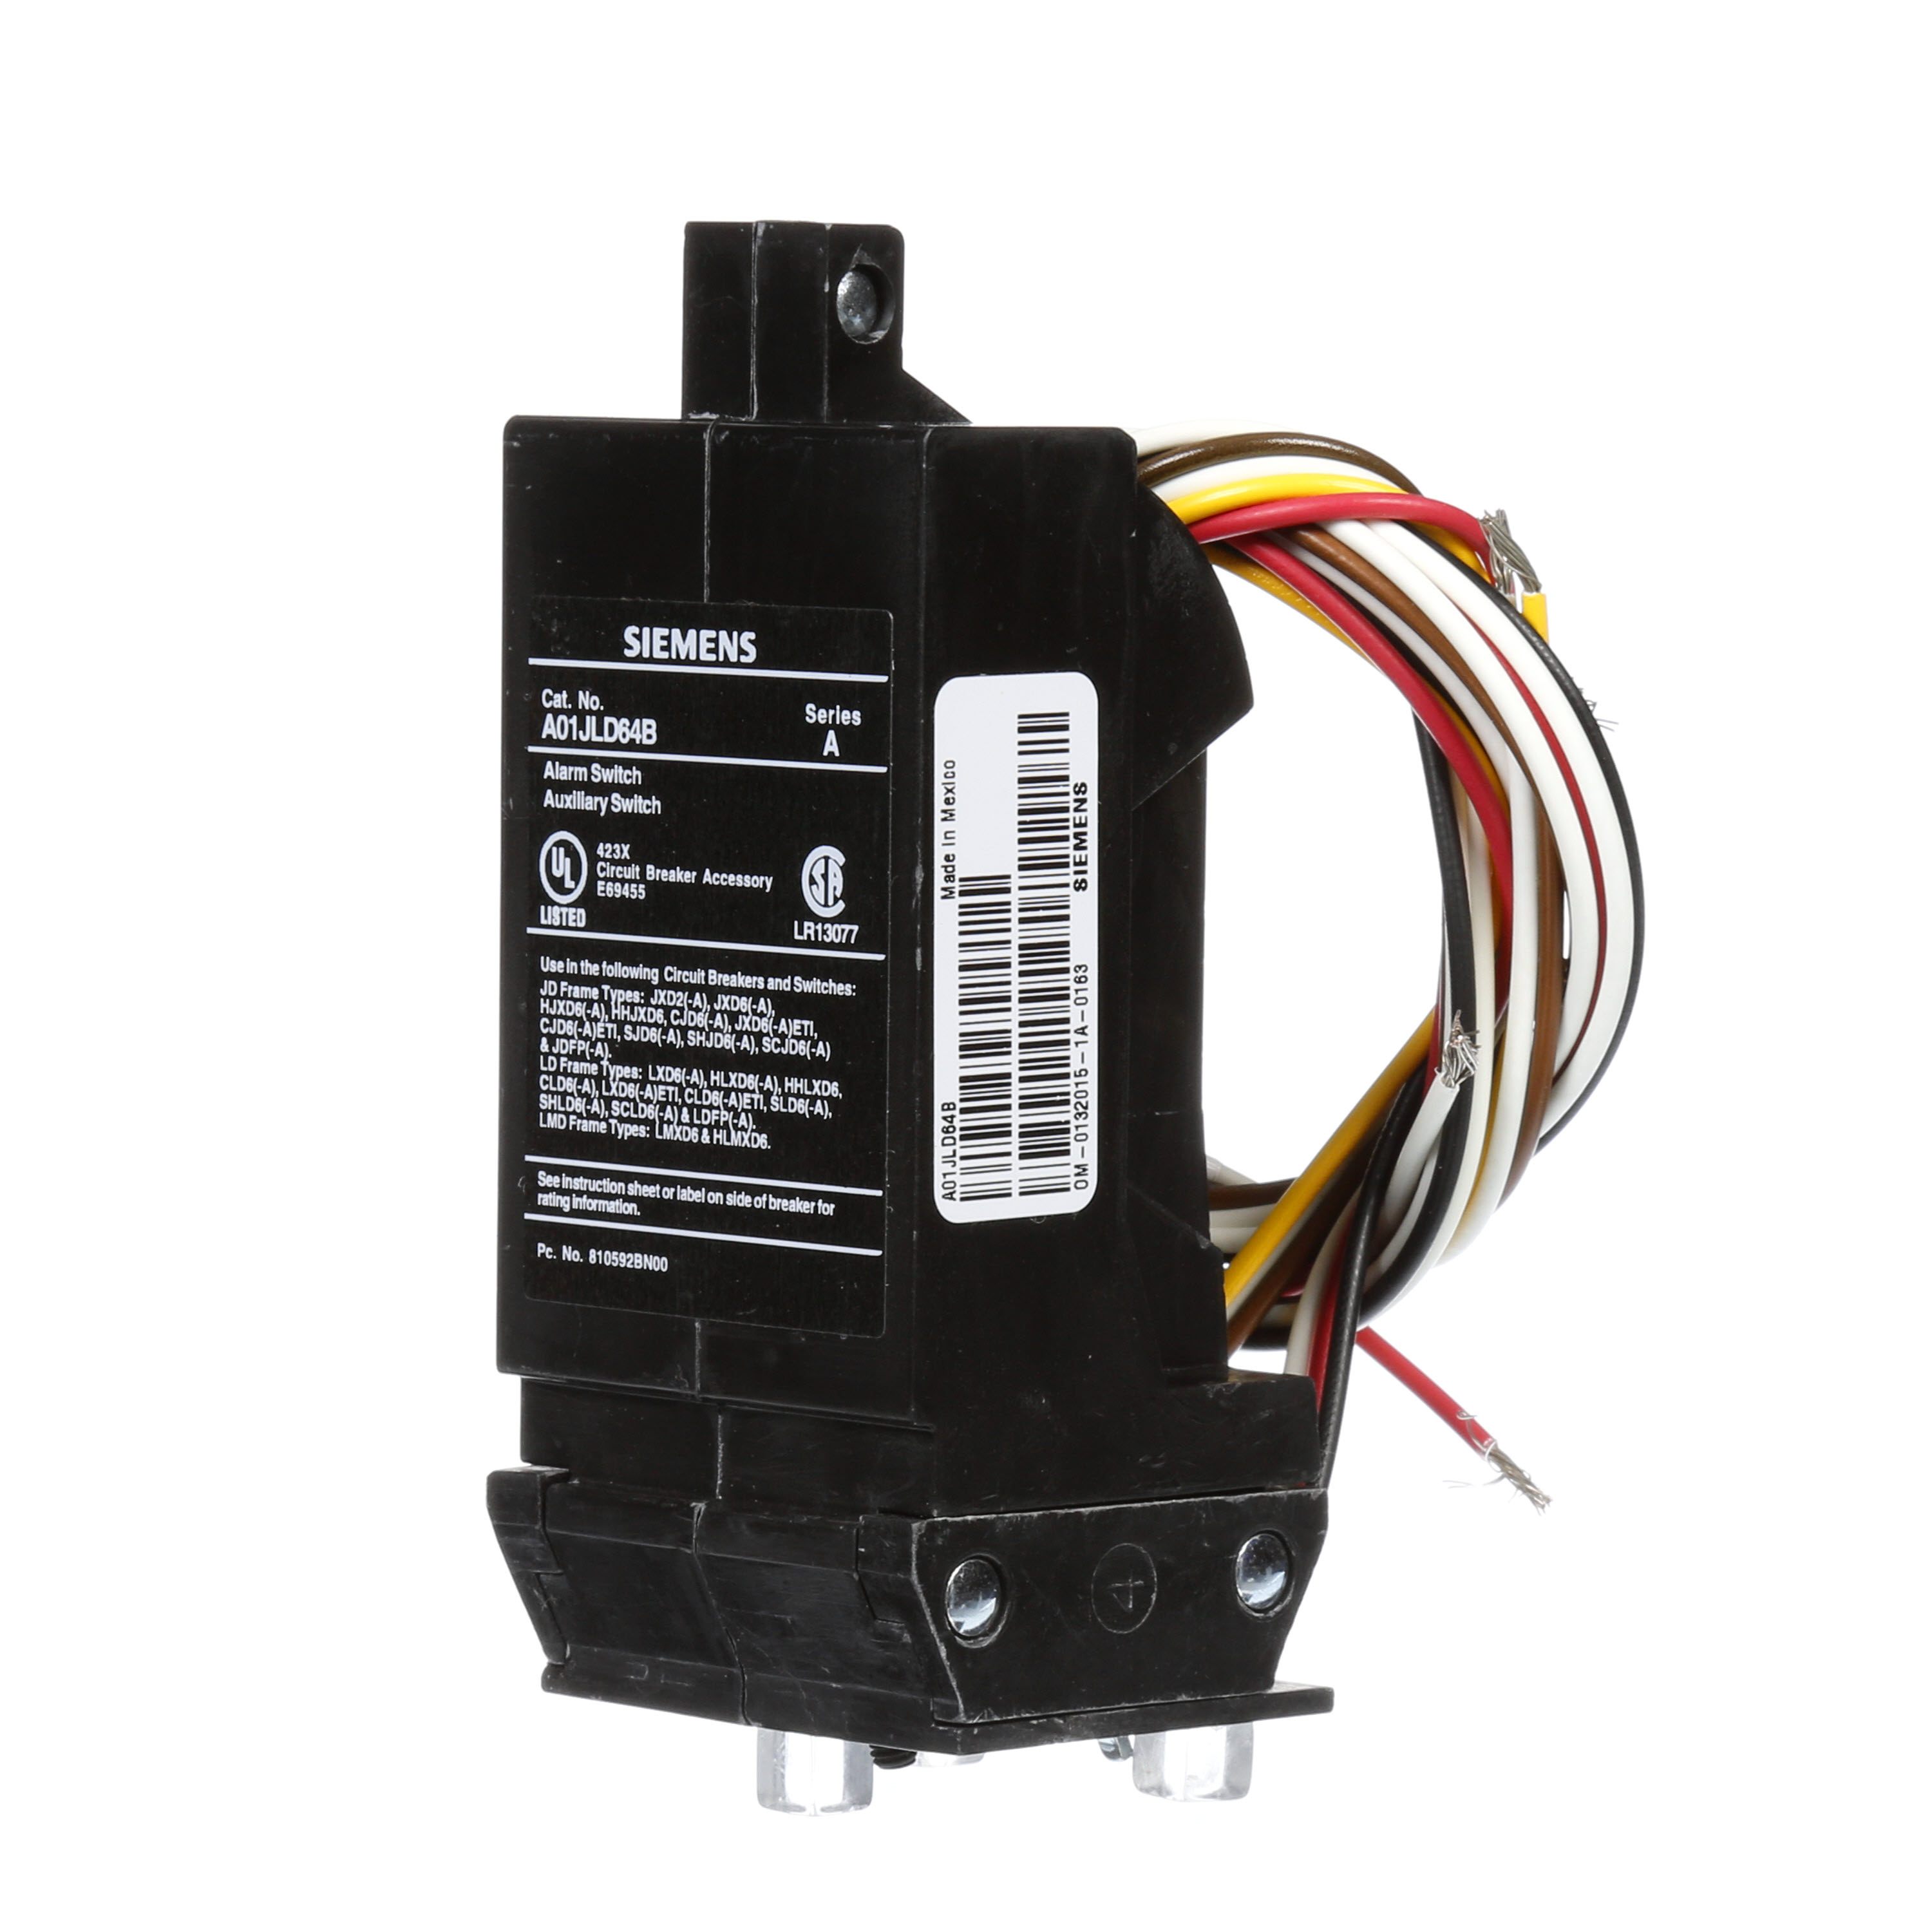 SIEMENS LOW VOLTAGE SENTRON MOLDED CASE CIRCUIT BREAKER INTERNAL ACCESSORY. 480VAC BELL ALARM COMBINATION WITH FORM C 480 VAC AUXILIARY SWITCH (1NO / 1NC). SUITS JD / LD / LMD FRAME BREAKERS.